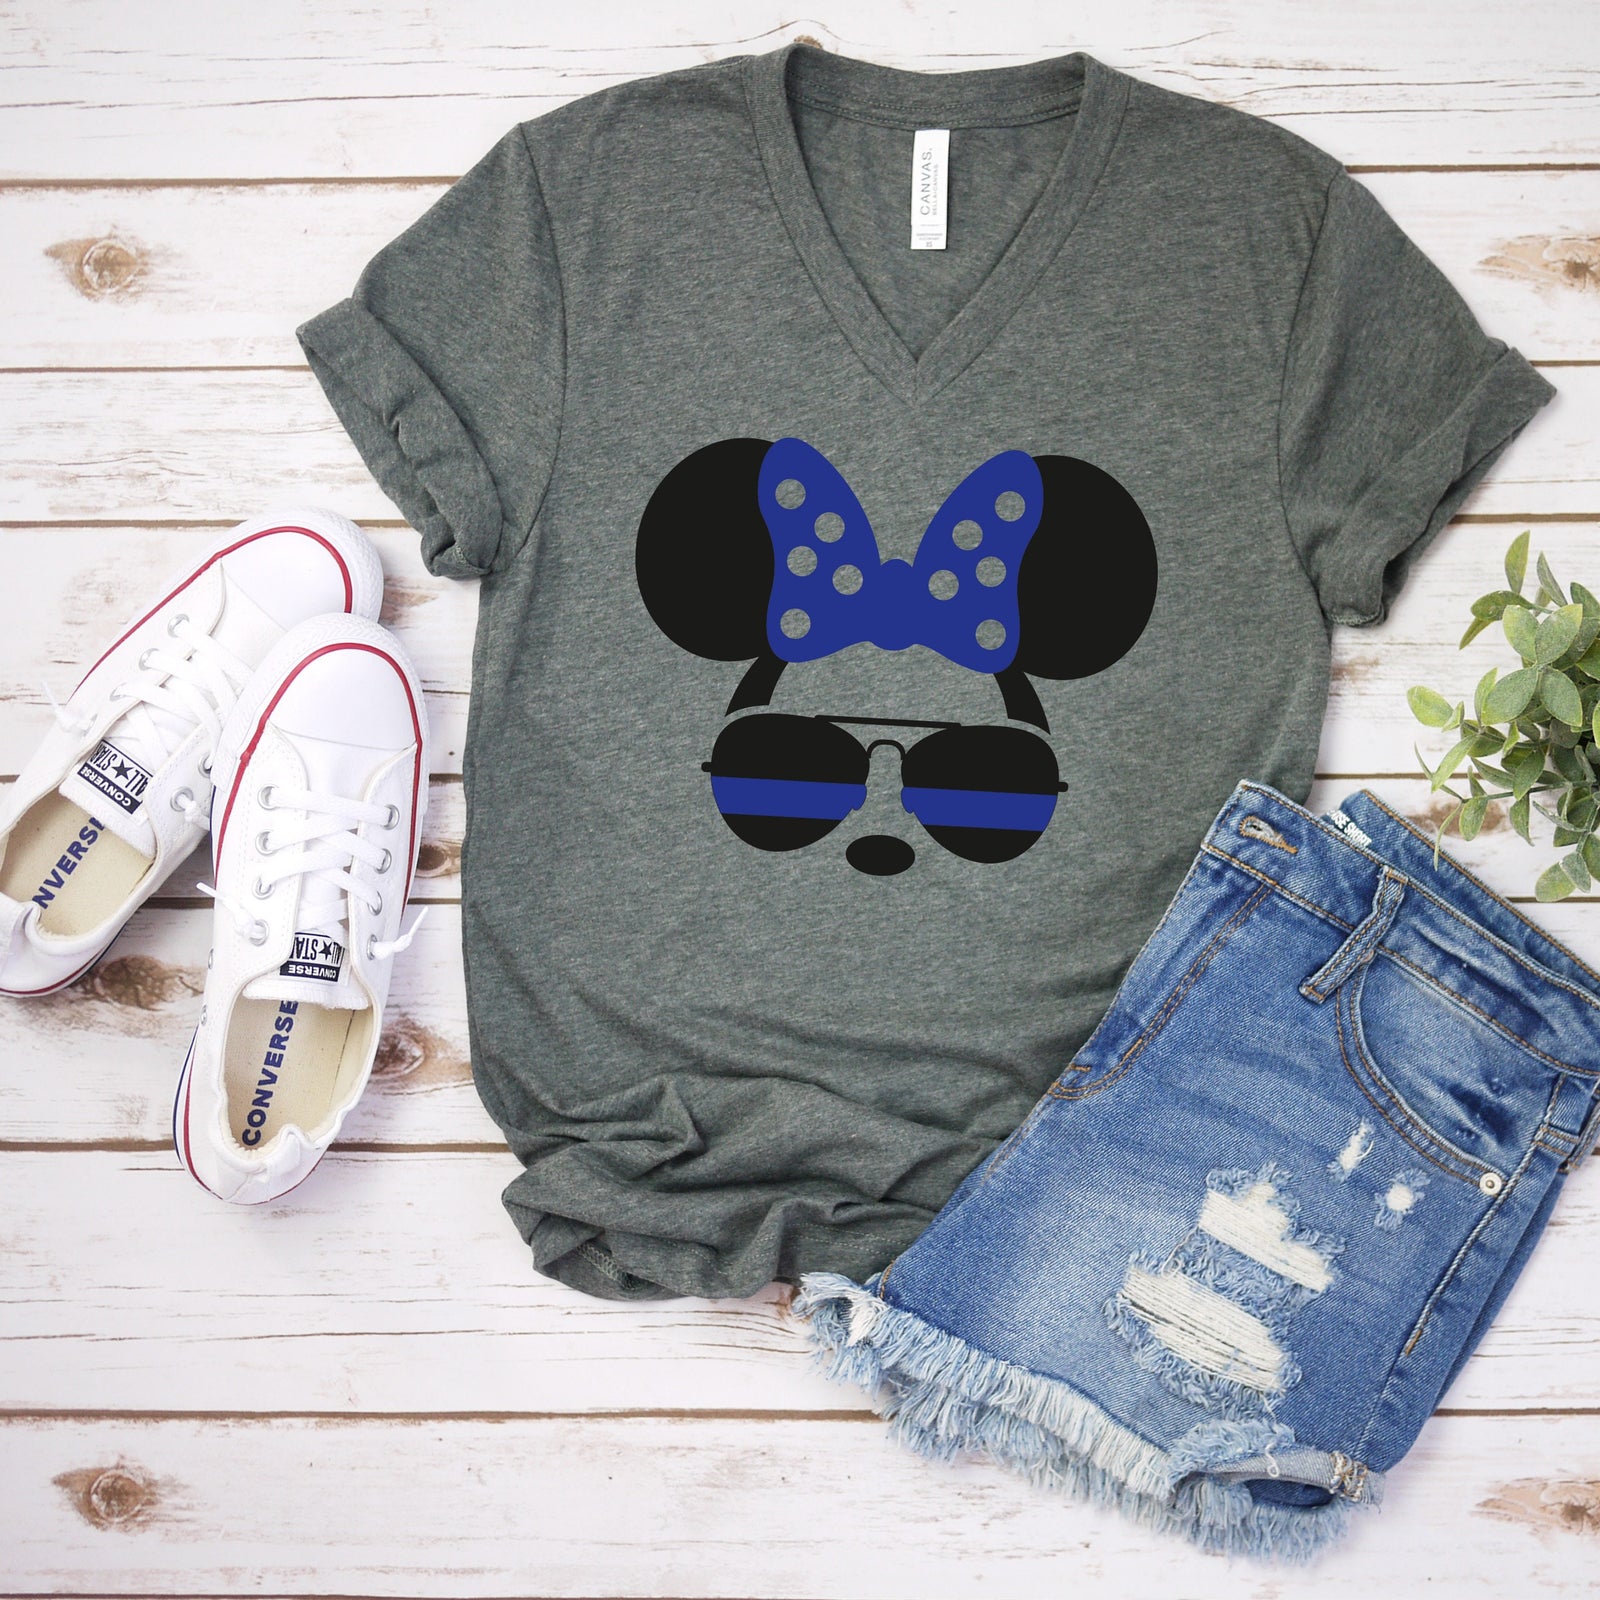 Police Minnie Mouse T Shirt -Blue Line - Front Line - Officer - Adult Disney Shirt